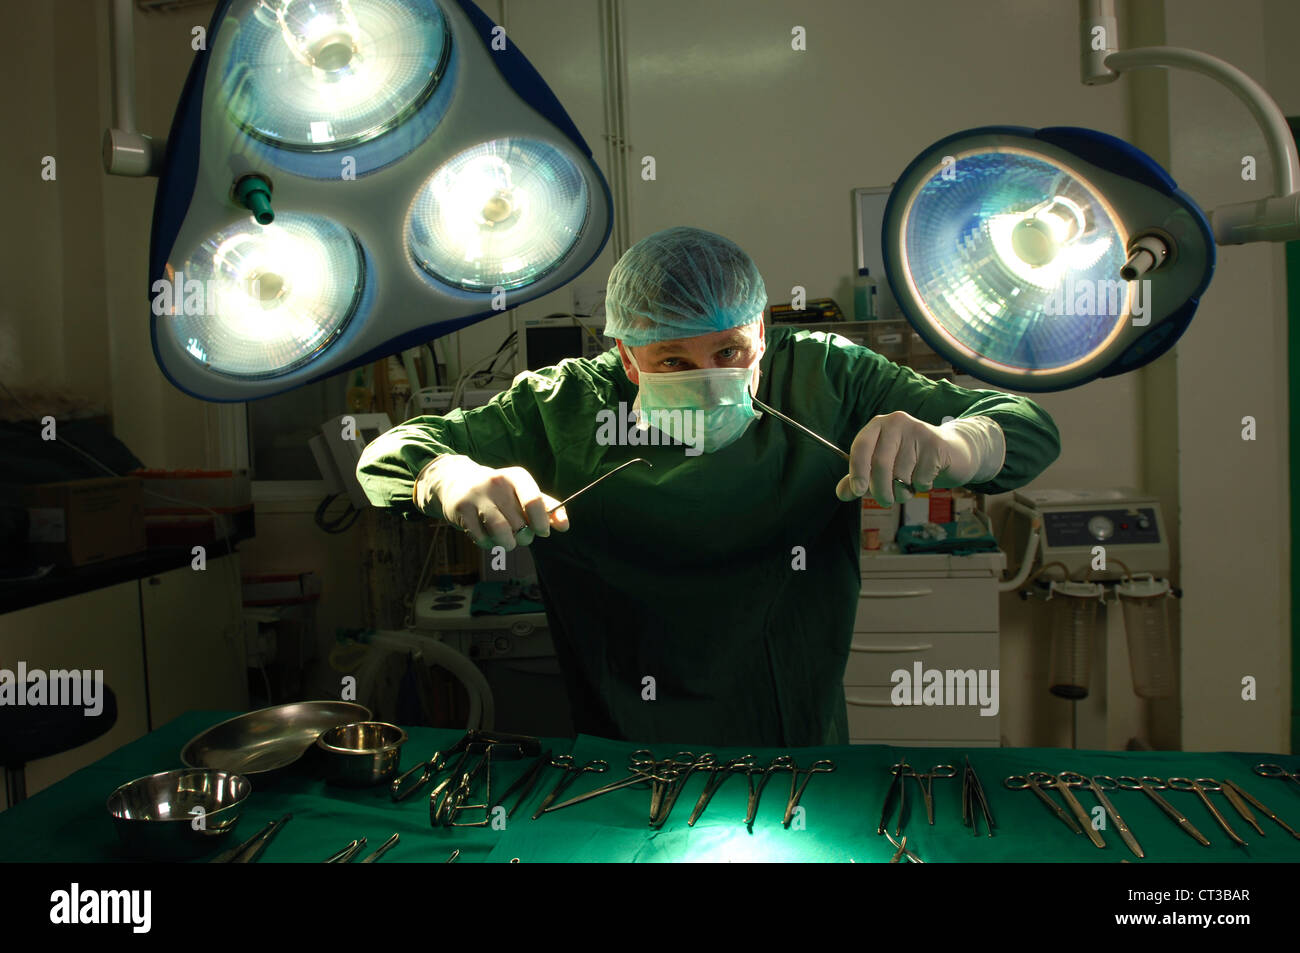 A surgeon brandishing surgical tools in an operating theatre. Stock Photo